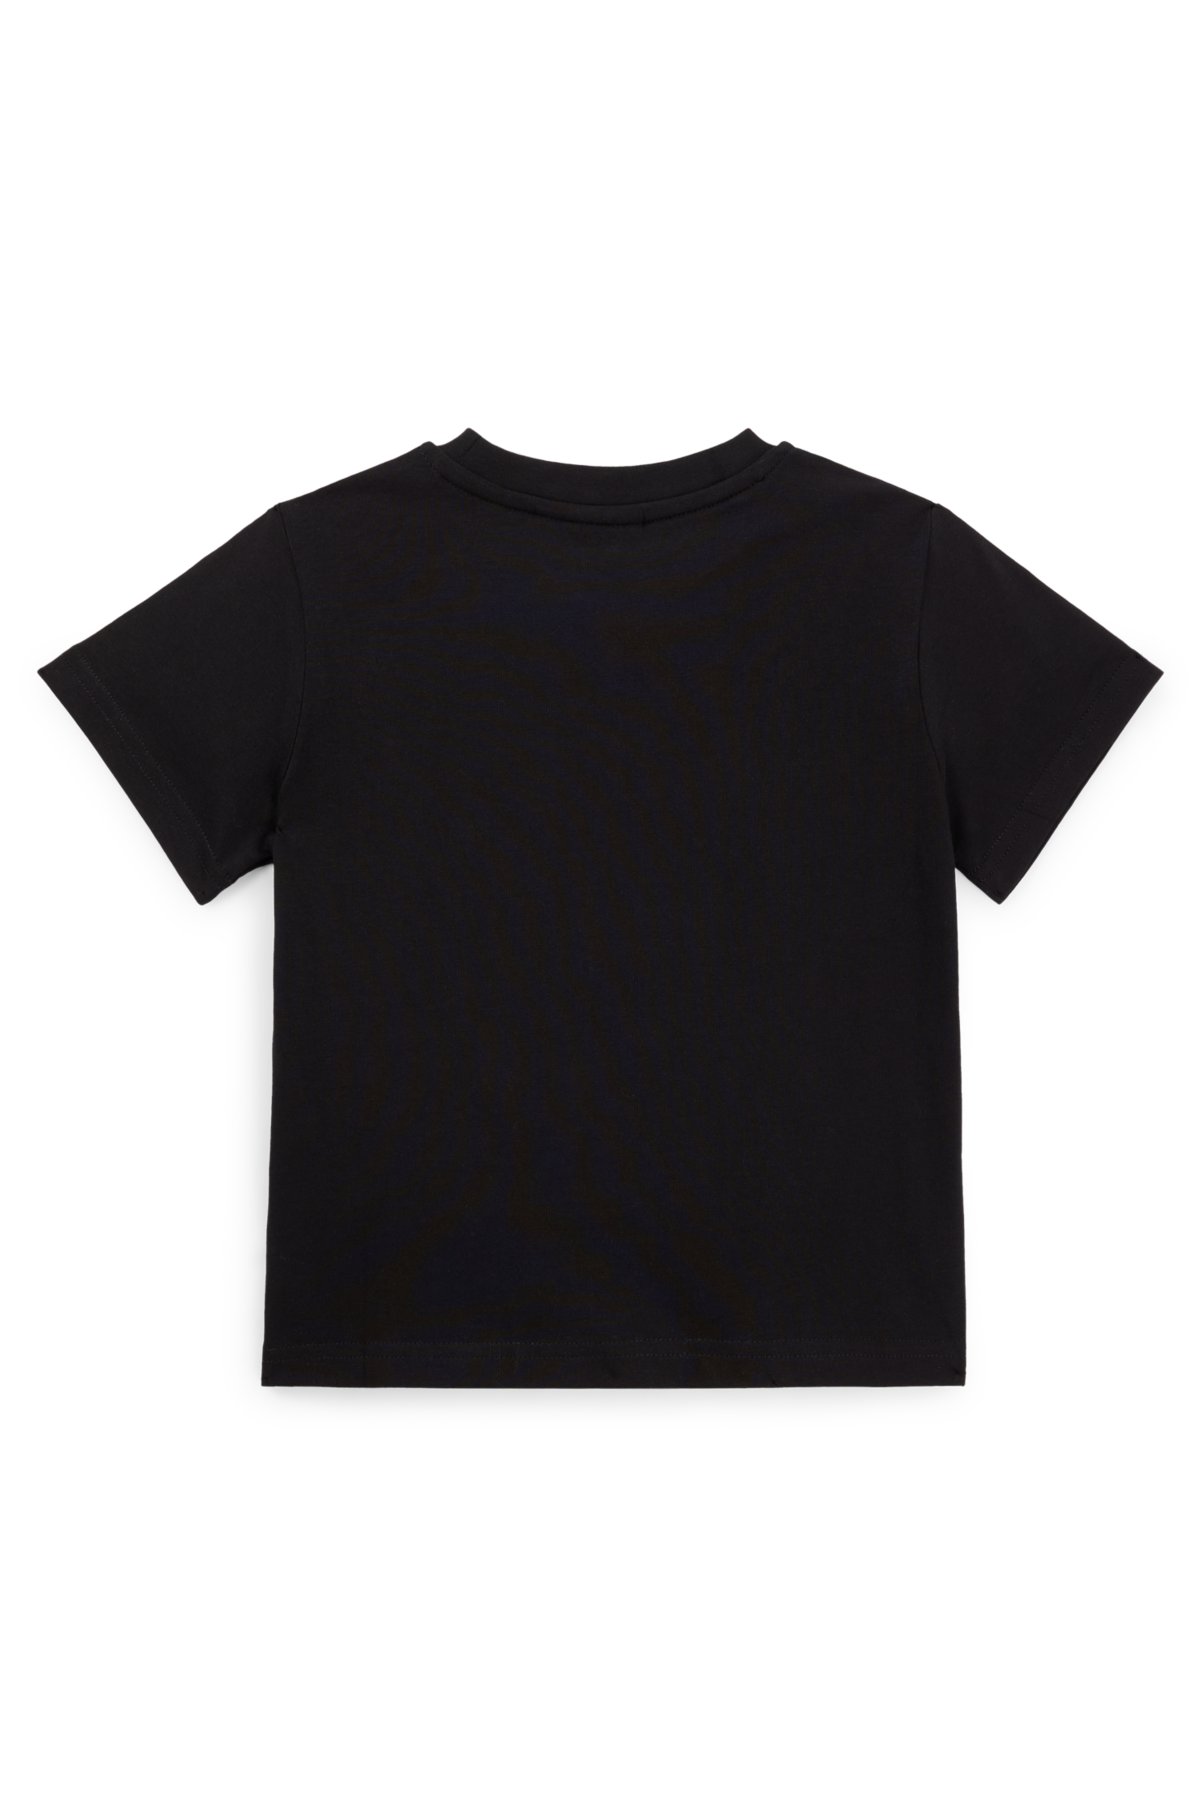 Kids' T-shirt in cotton jersey with logo print, Black